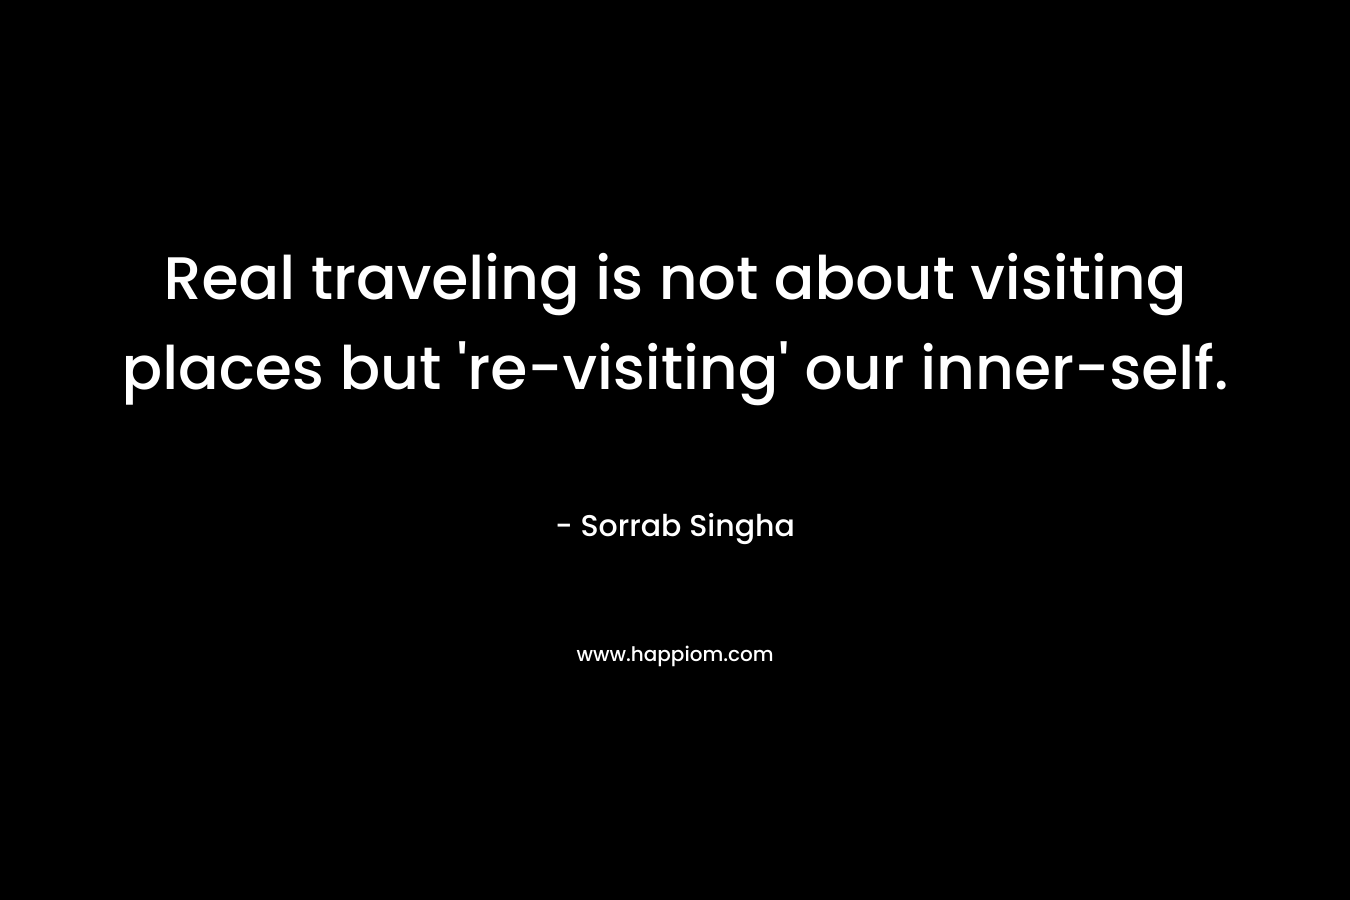 Real traveling is not about visiting places but 're-visiting' our inner-self.